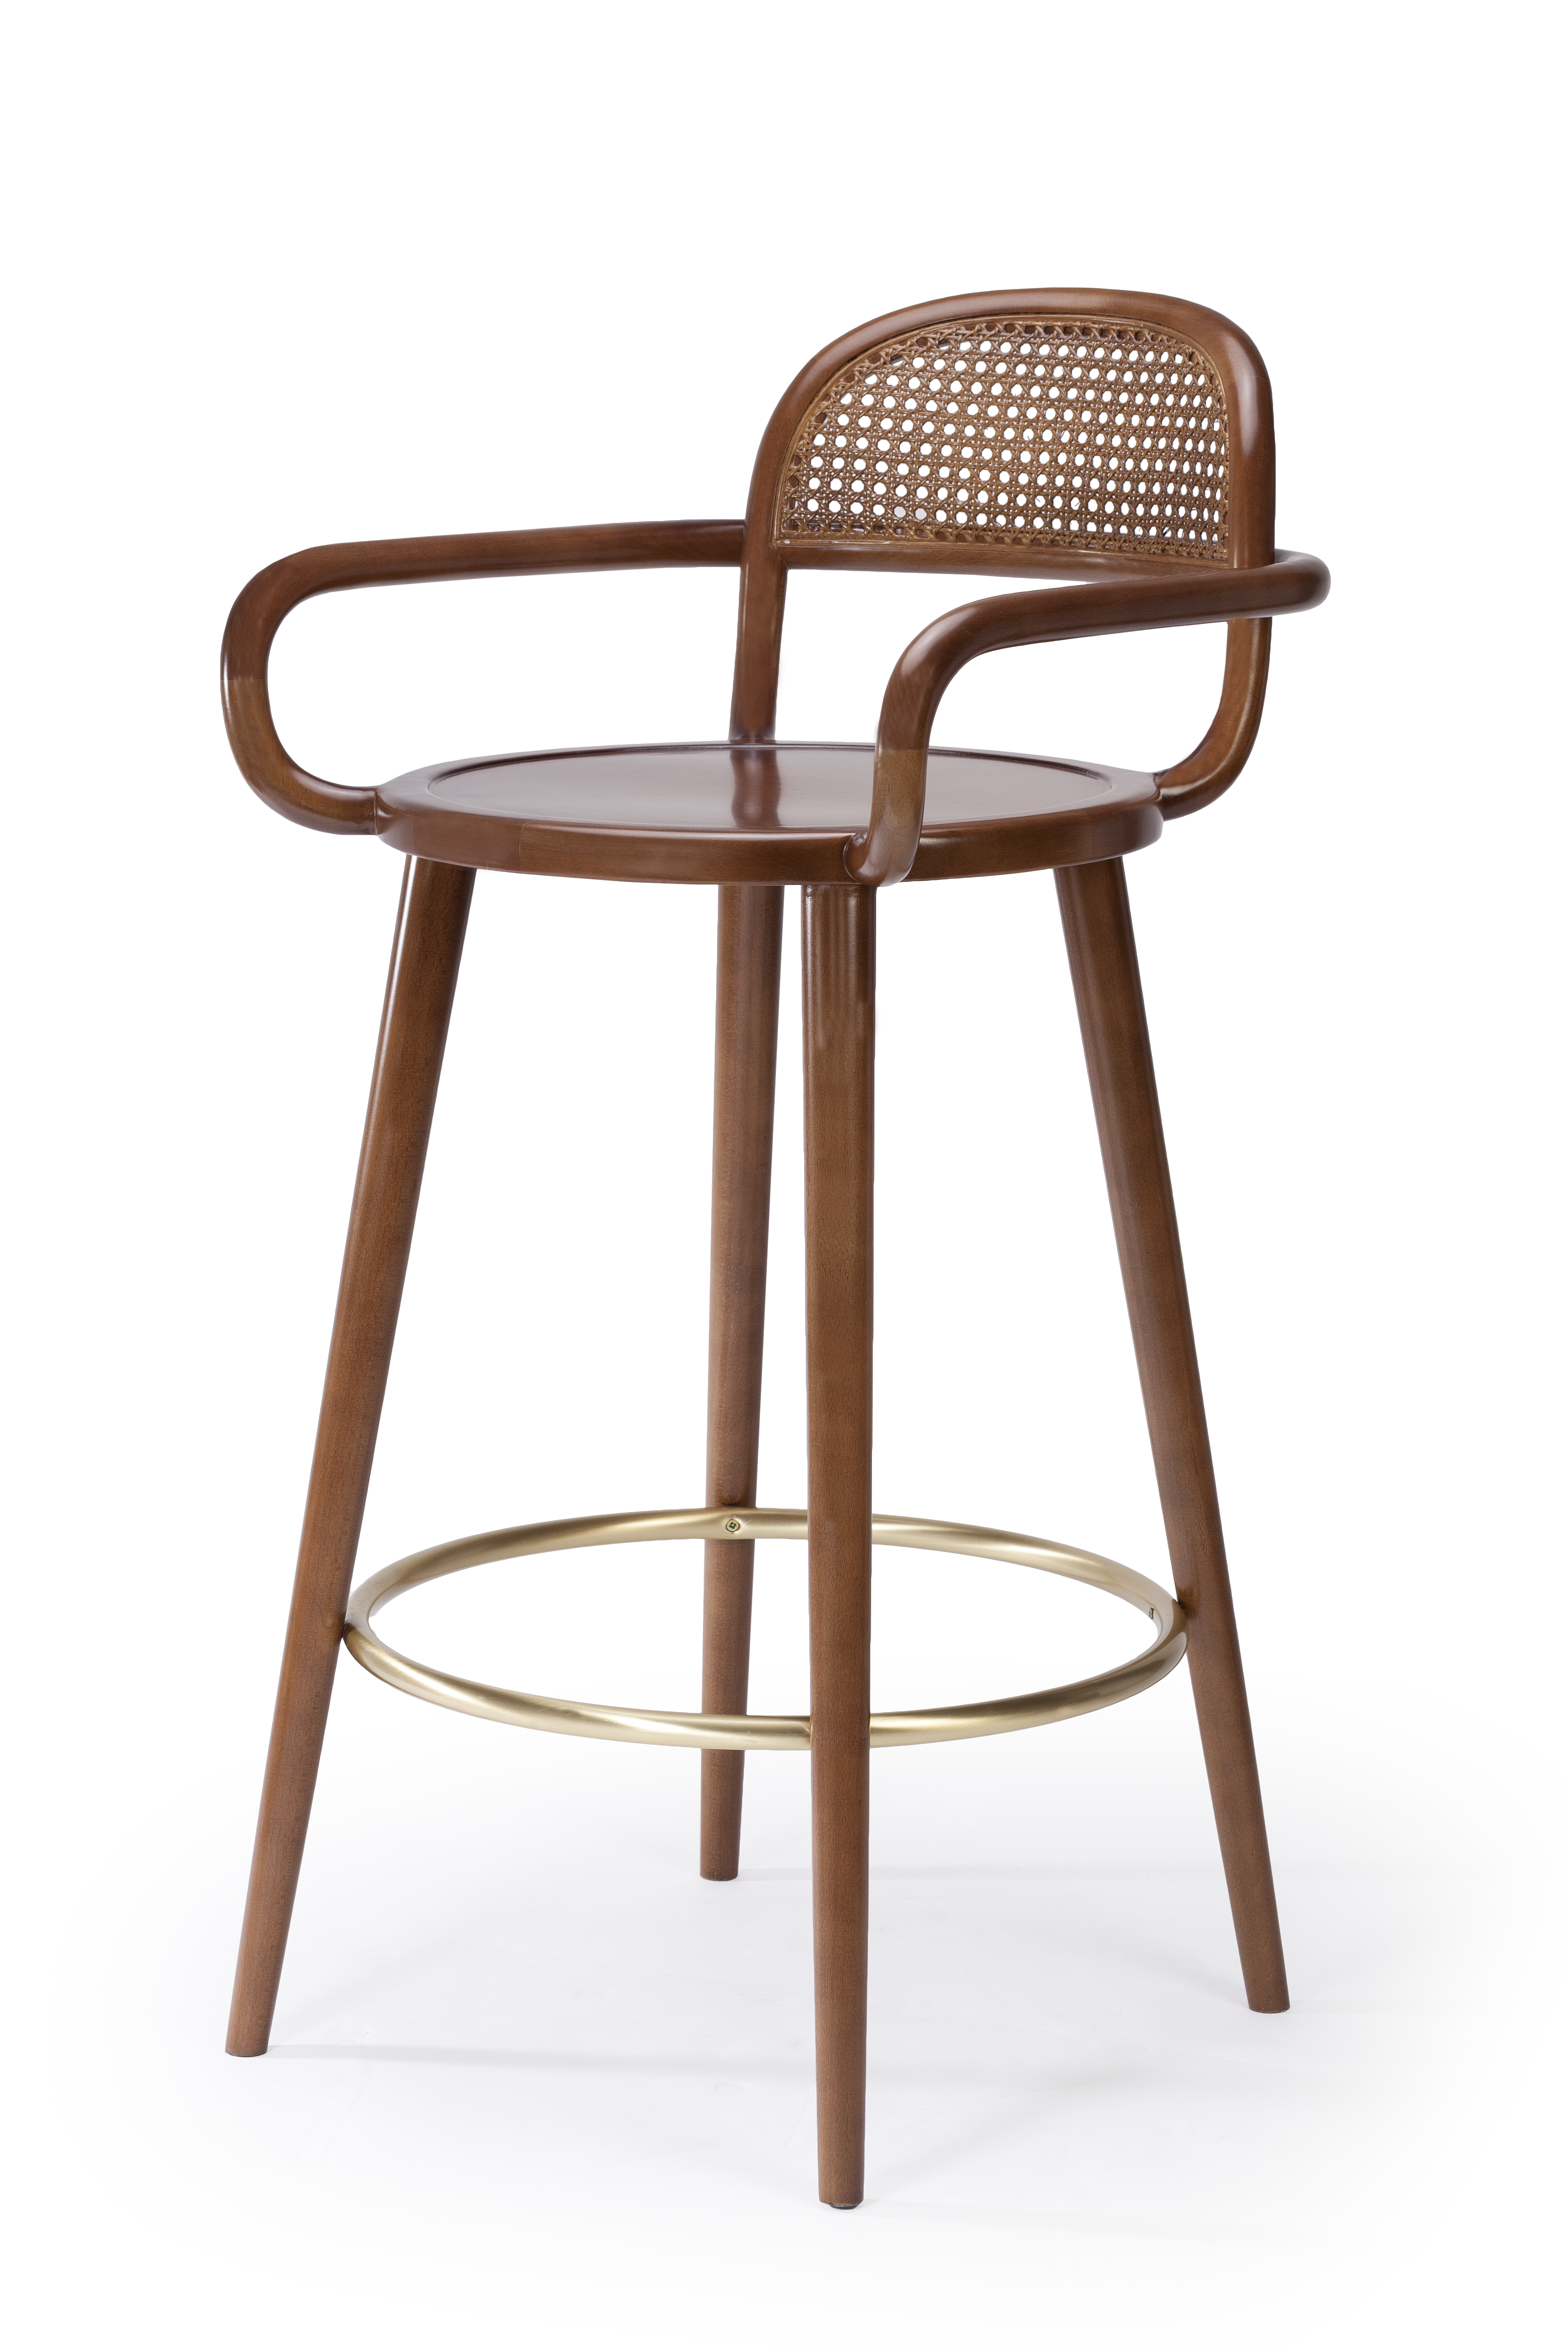 Bar Chairs: Stylish and Functional Seating for Every Space